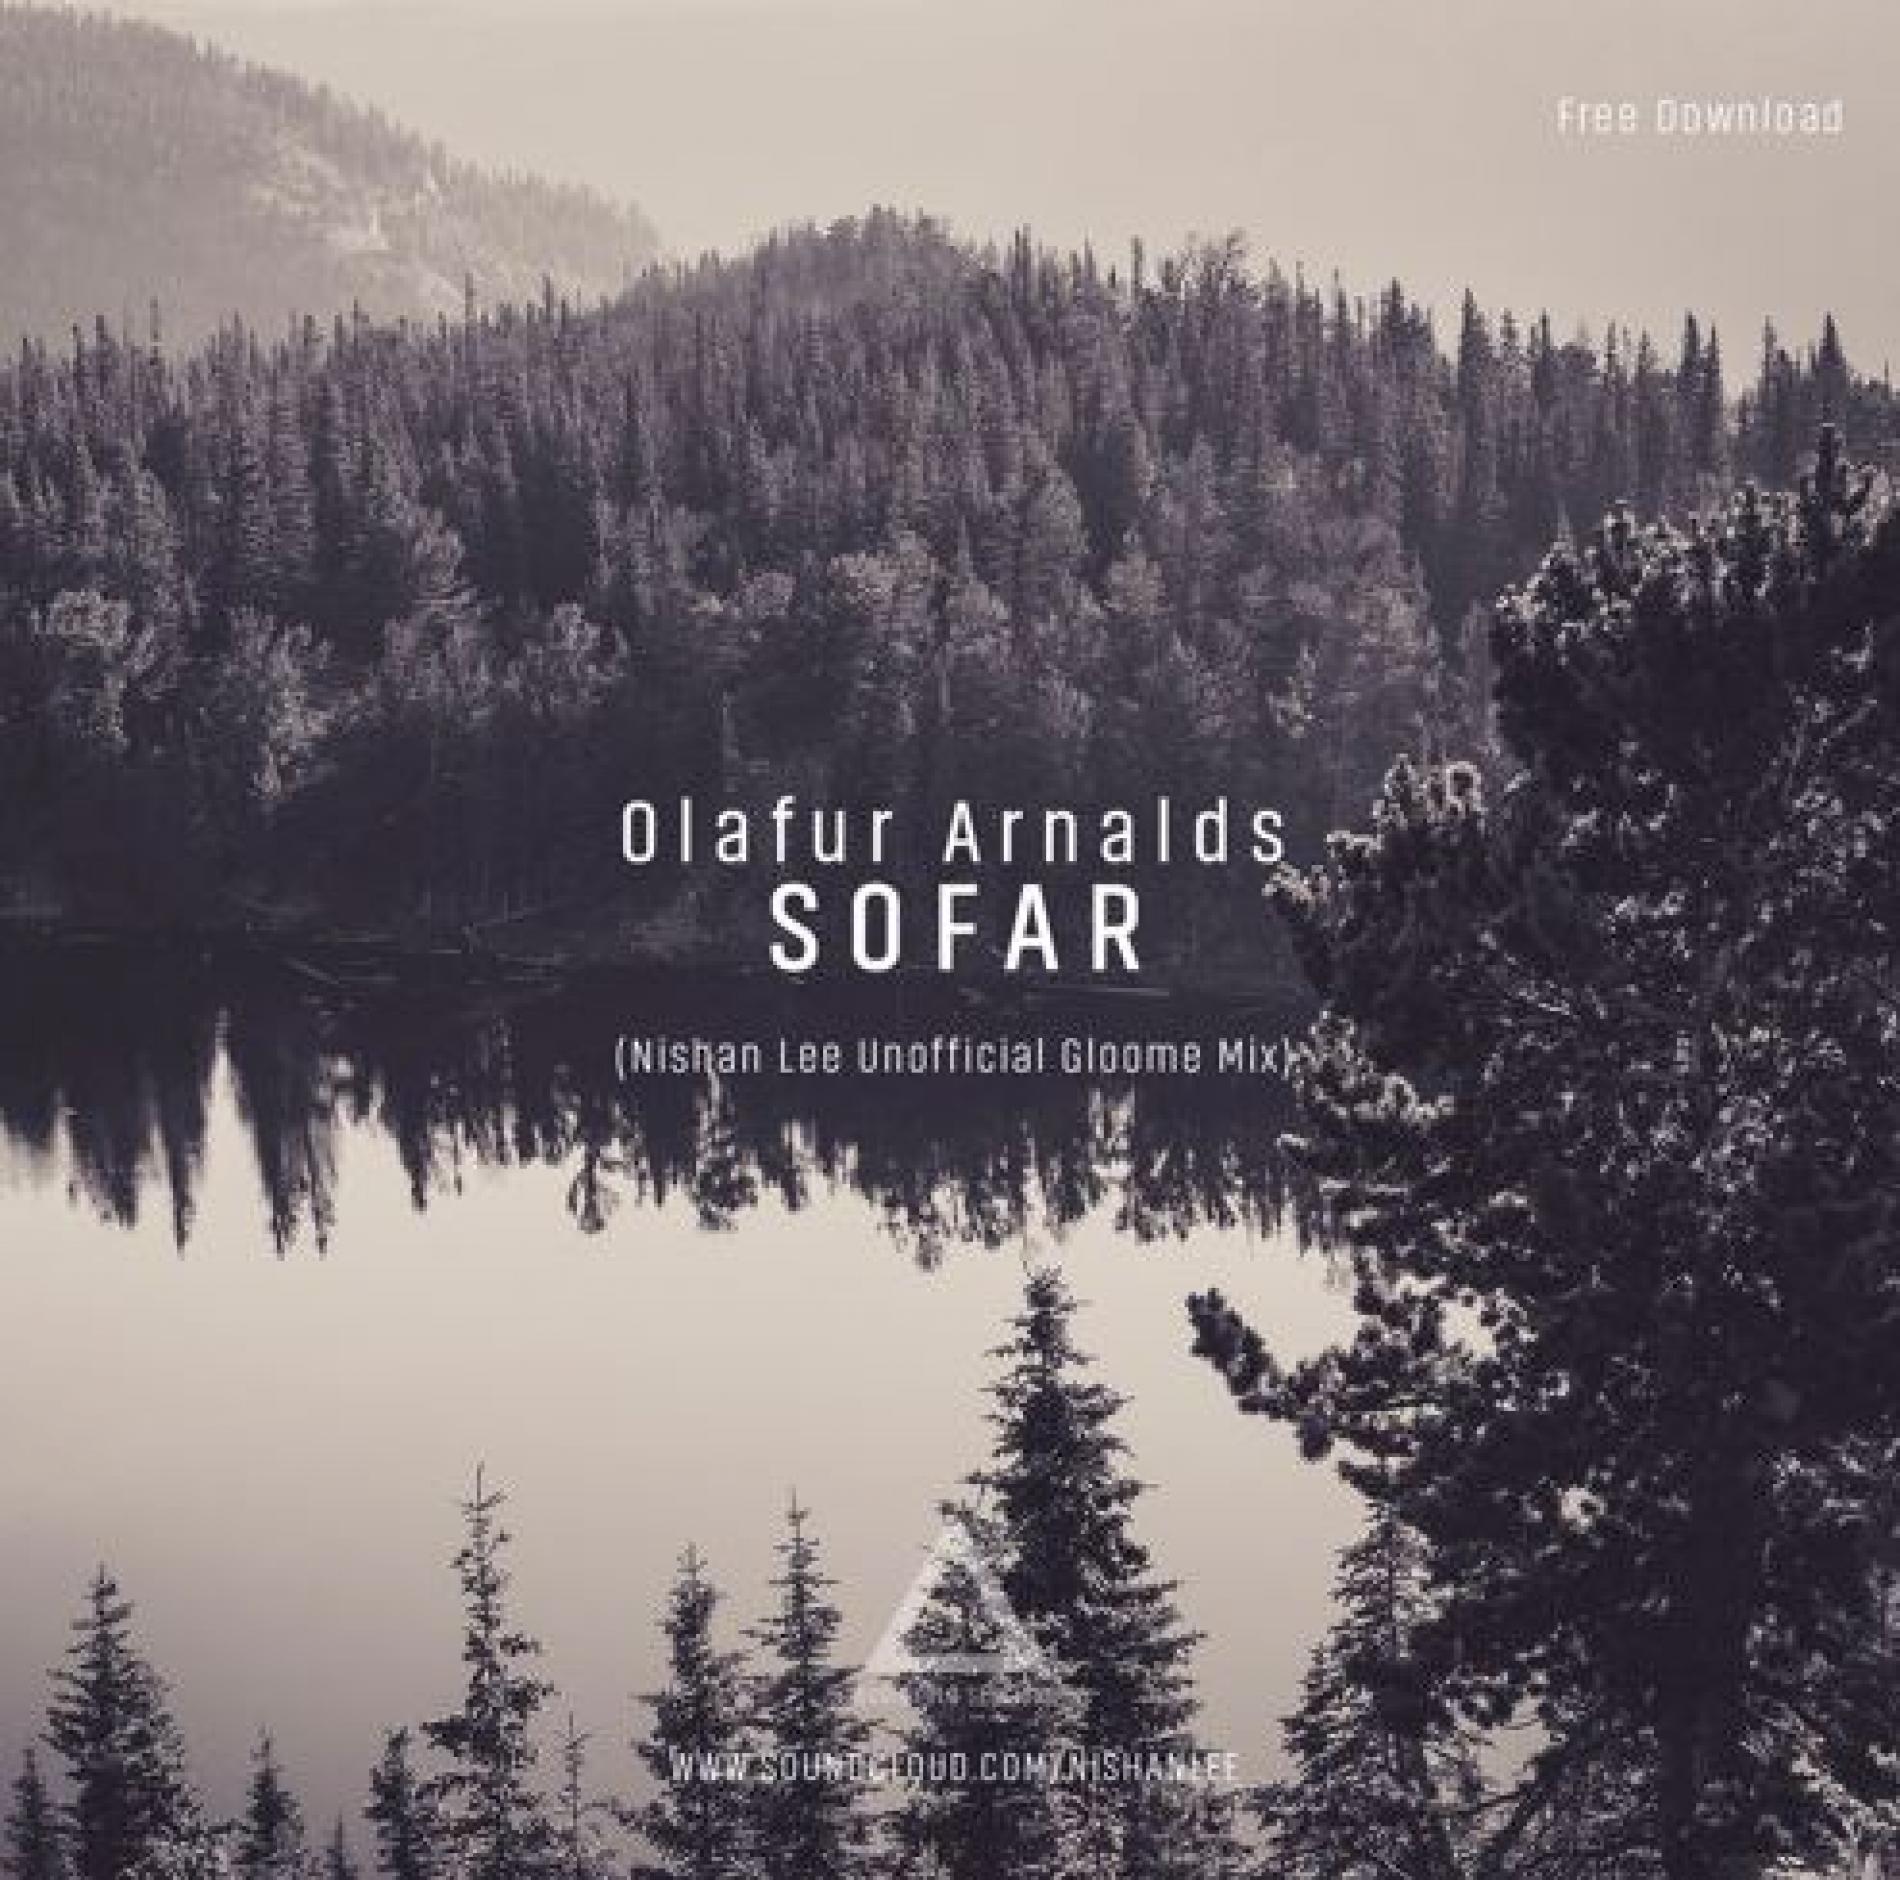 Olafur Arnalds – So Far (Nishan Lee Unofficial Gloome Mix)